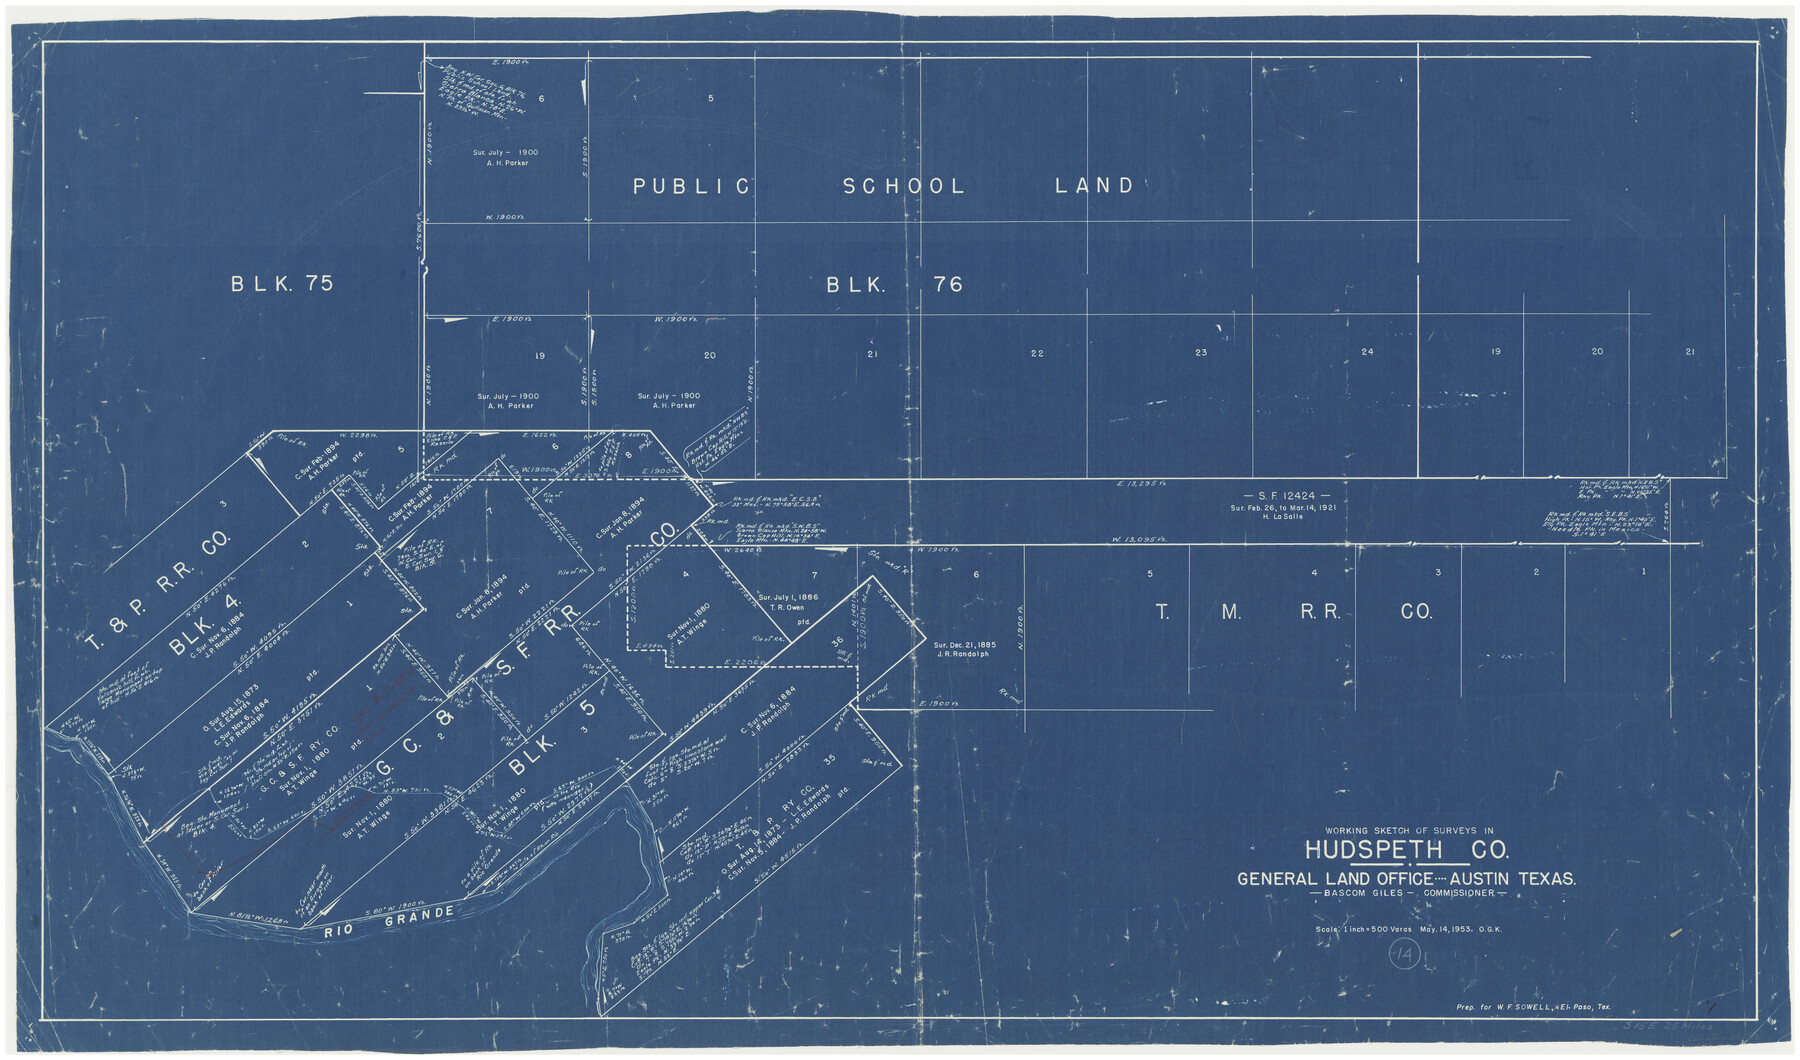 66296, Hudspeth County Working Sketch 14, General Map Collection